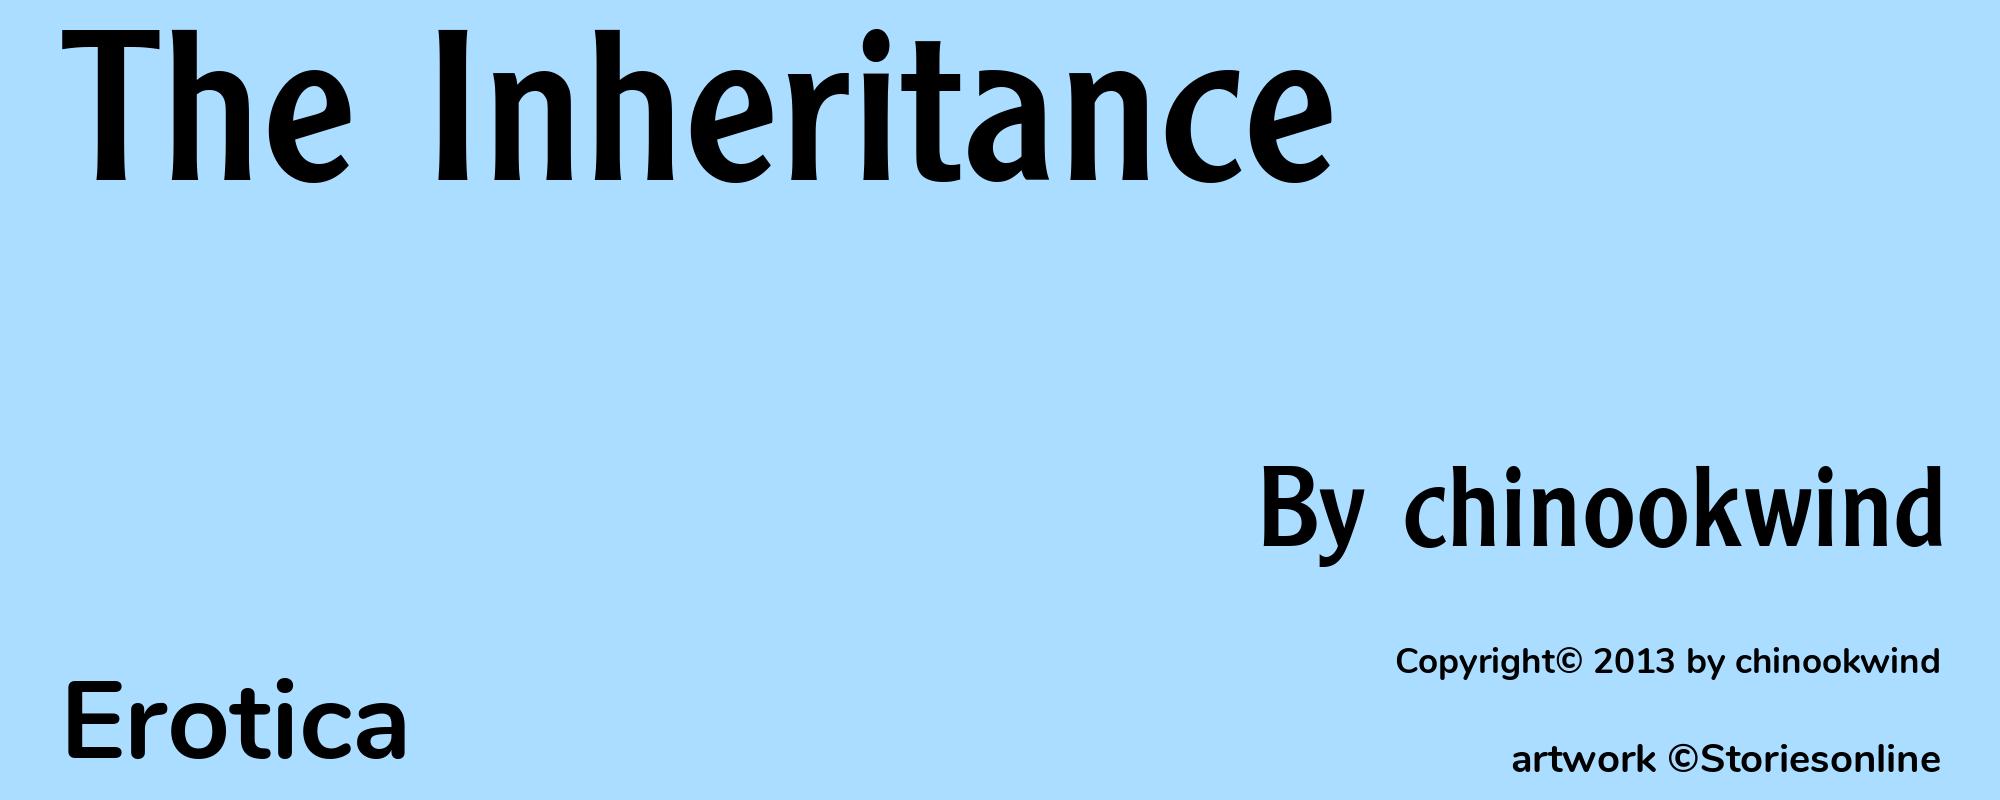 The Inheritance - Cover